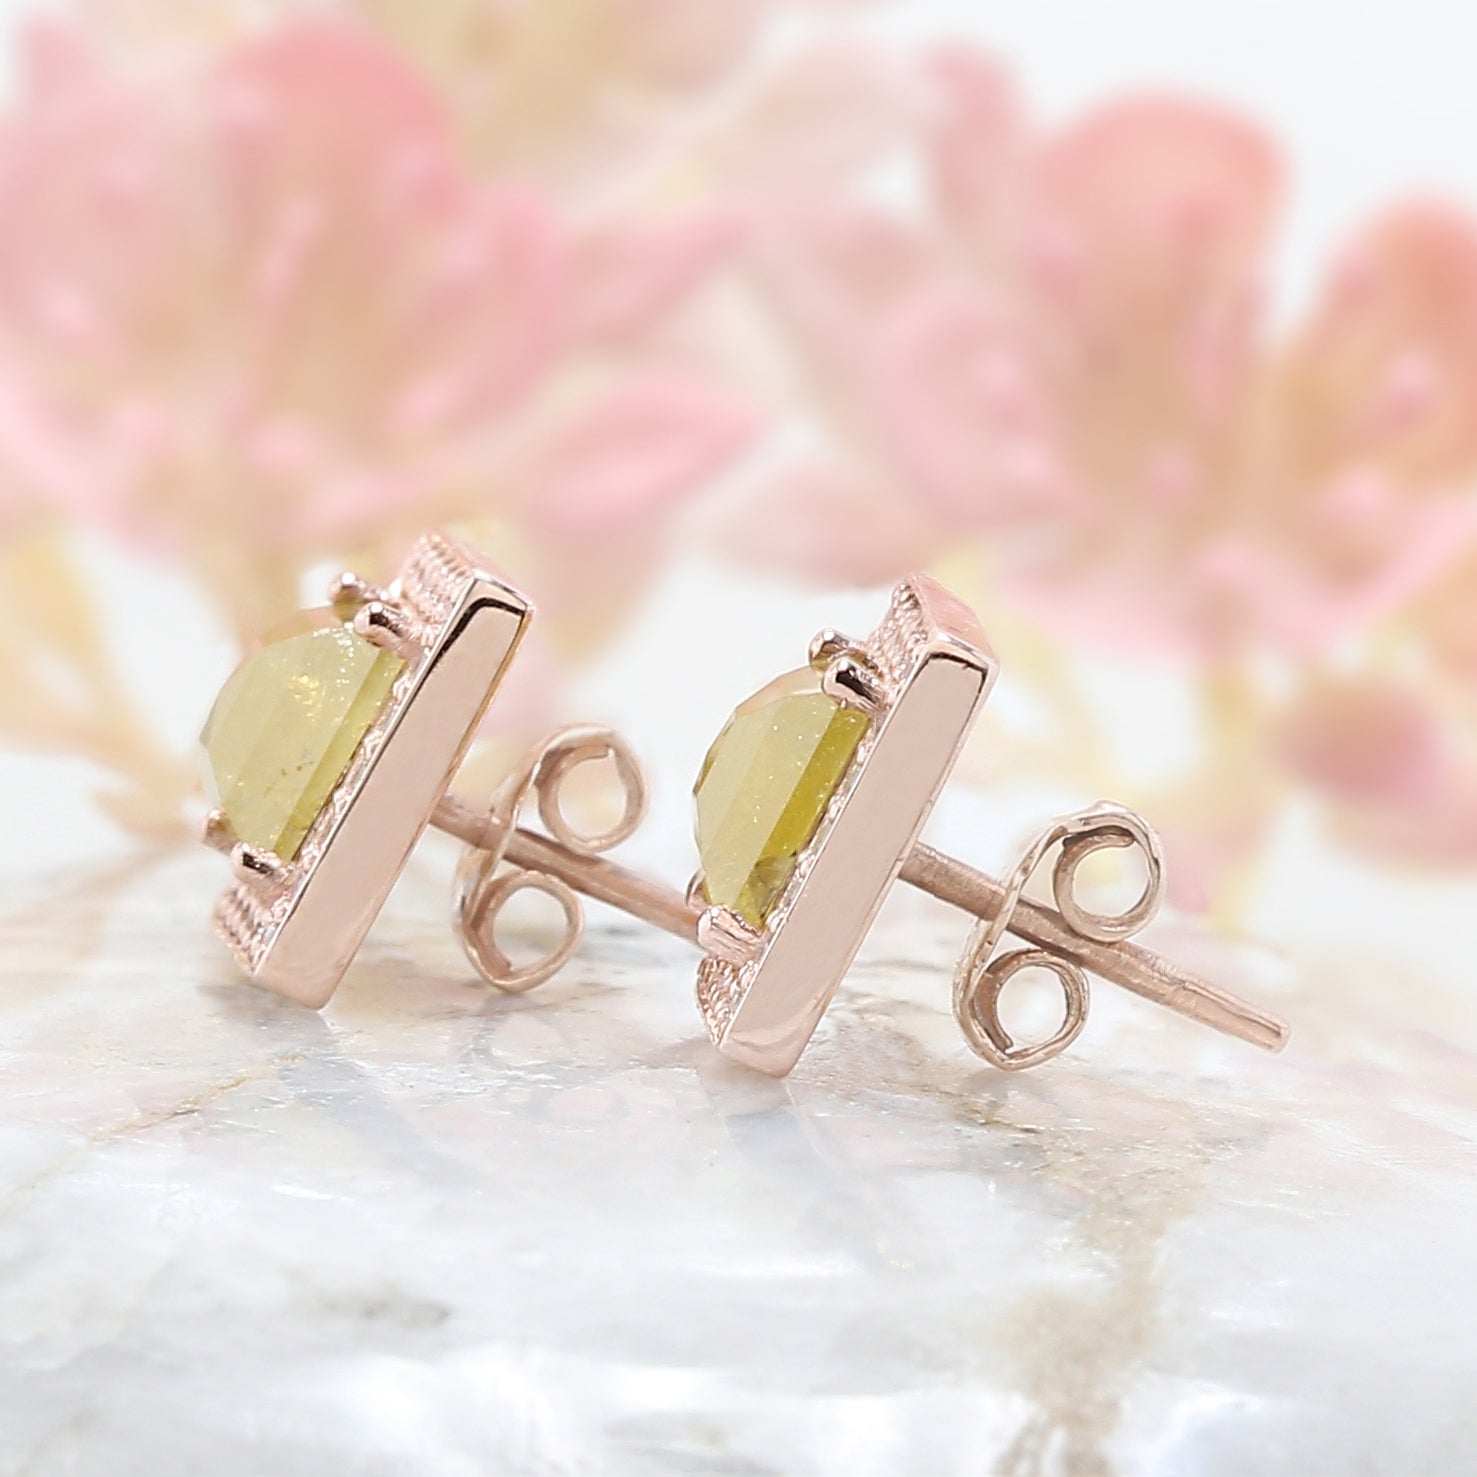 Rectangle Yellow Color Diamond Earring Engagement Wedding Gift Earring 14K Solid Rose White Yellow Gold Earring 1.83 CT KDN7986